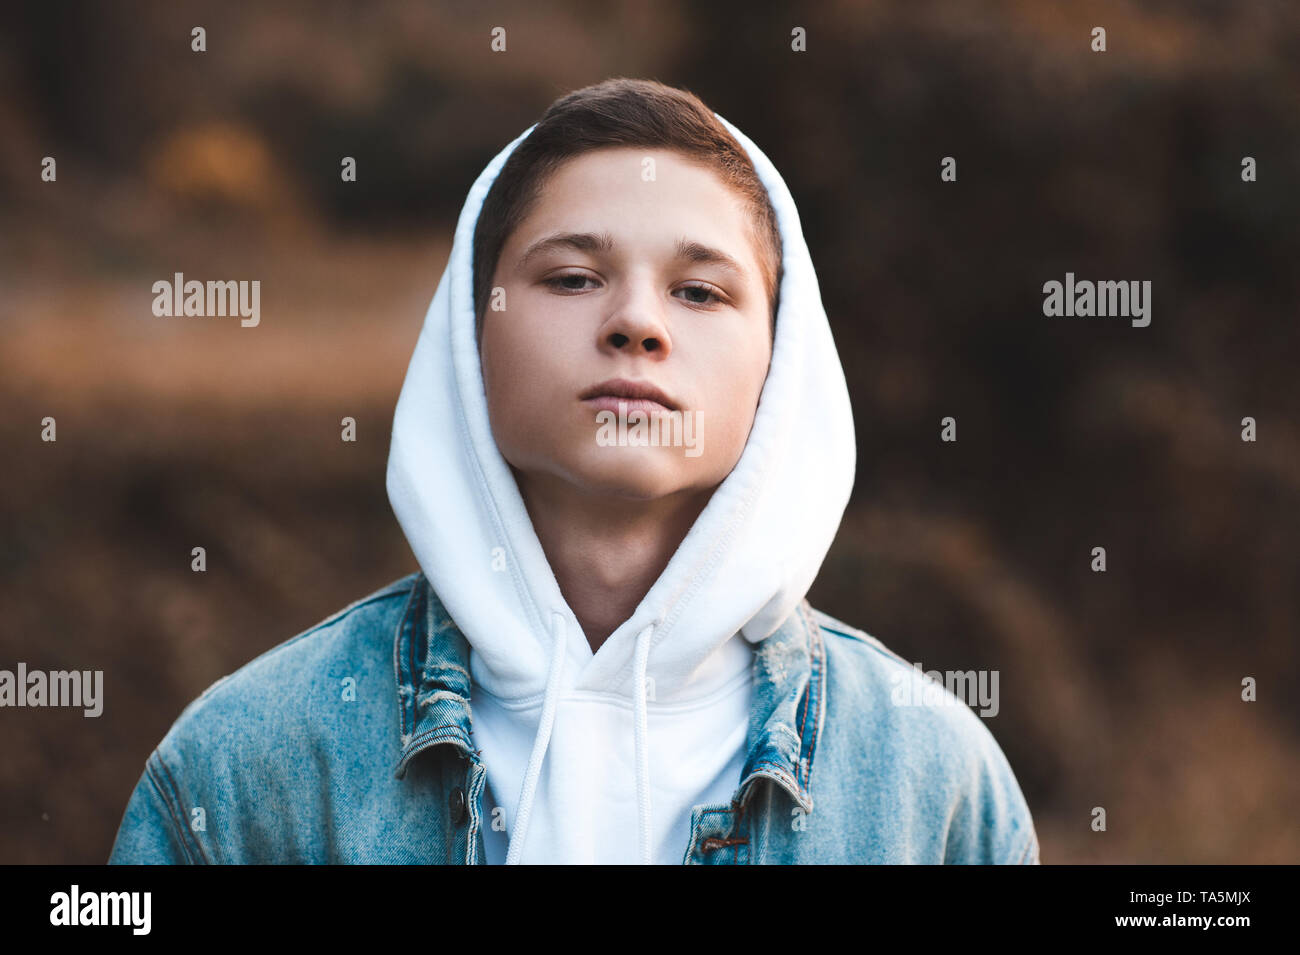 Teen boy 16-17 year old wearing white hoodie and denim jacket closeup. Looking at camera. 20s. Stock Photo